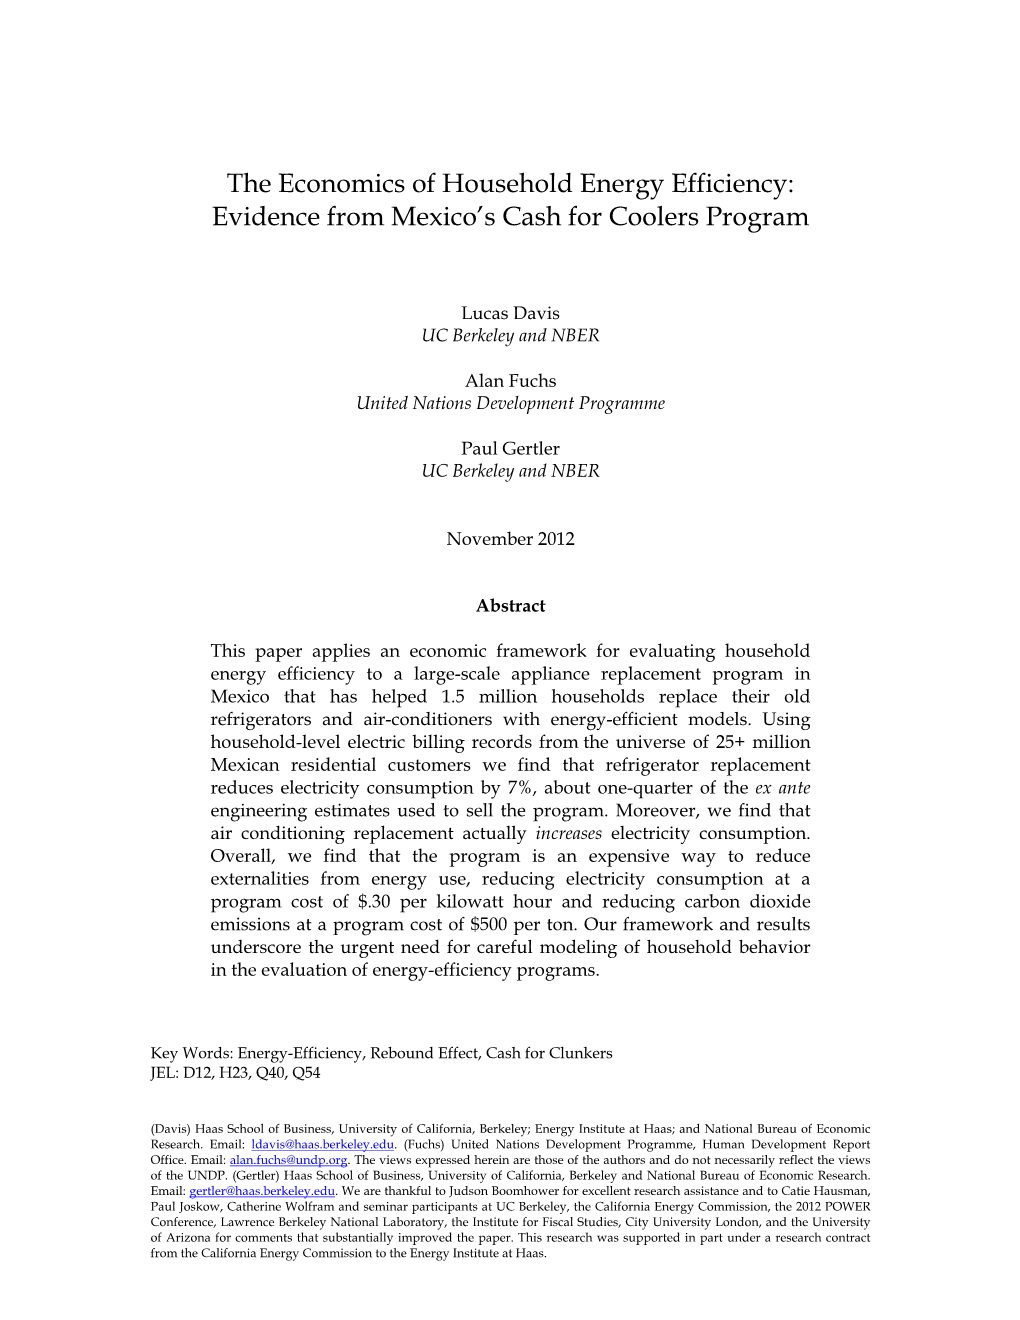 The Economics of Household Energy Efficiency: Evidence from Mexico’S Cash for Coolers Program